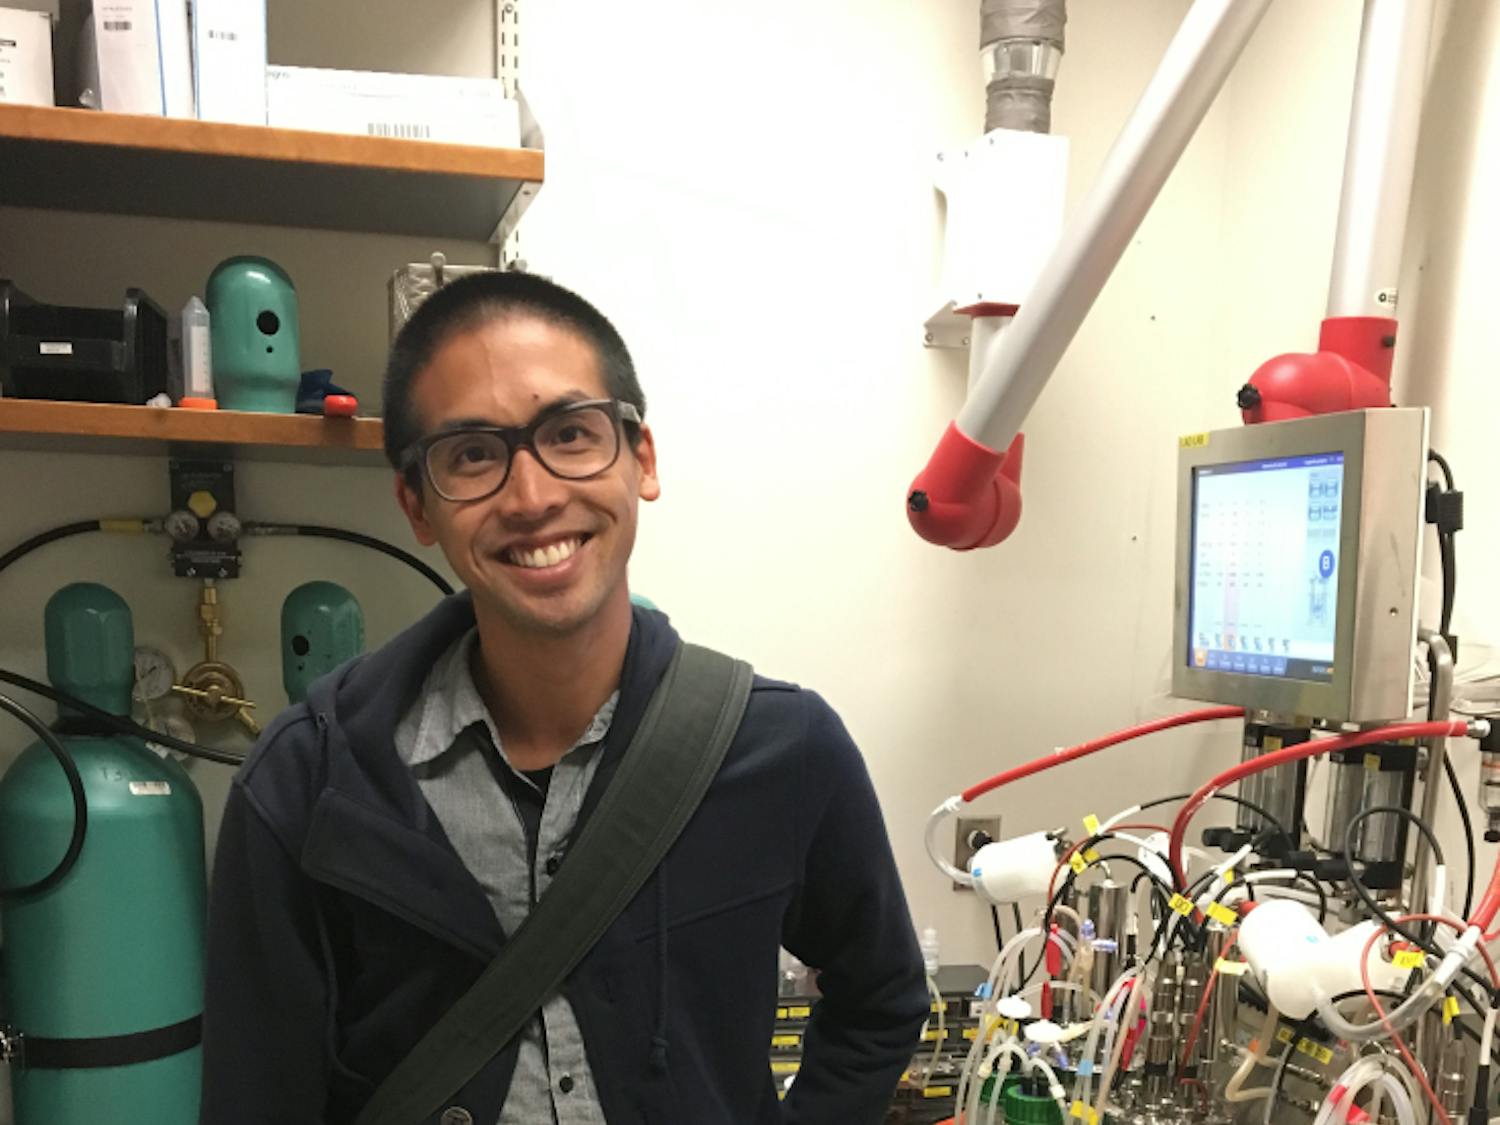 Lawrence David is currently&nbsp;an assistant professor in the Duke Center for Genomic and Computational Biology.